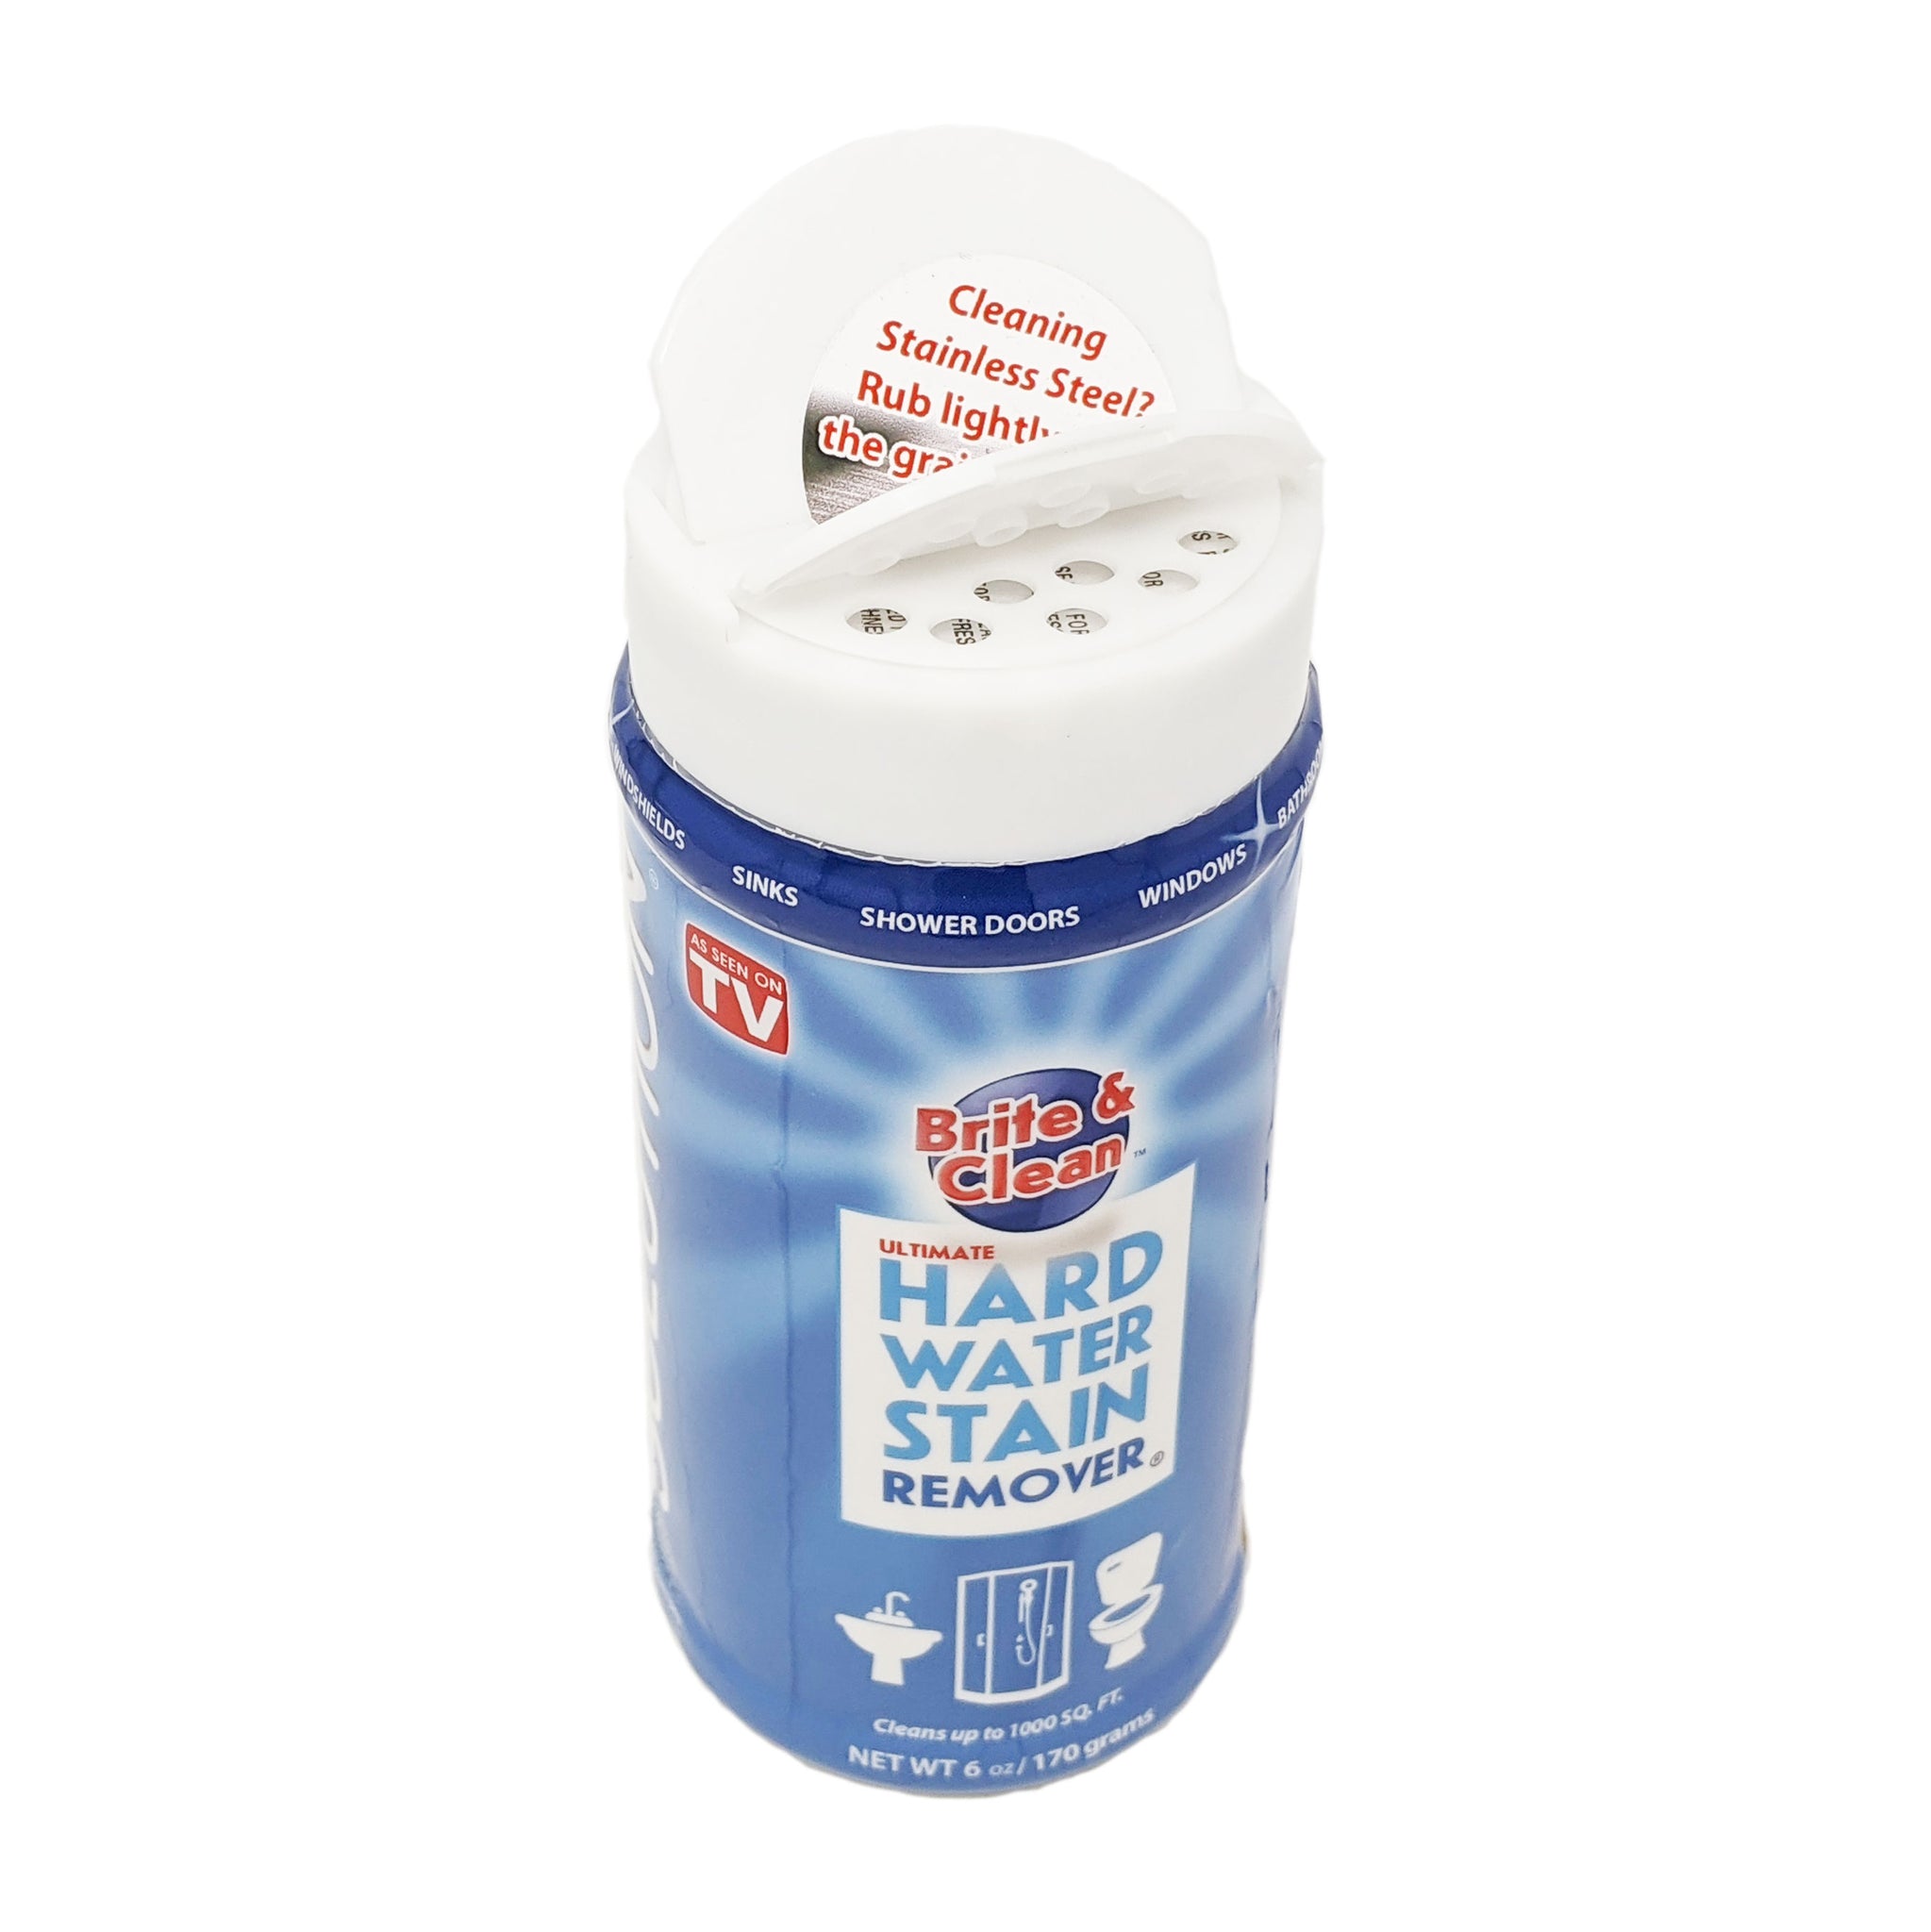 Brite & Clean A-SCS-1 Ultimate Hard Water Stain Remover, 6 oz